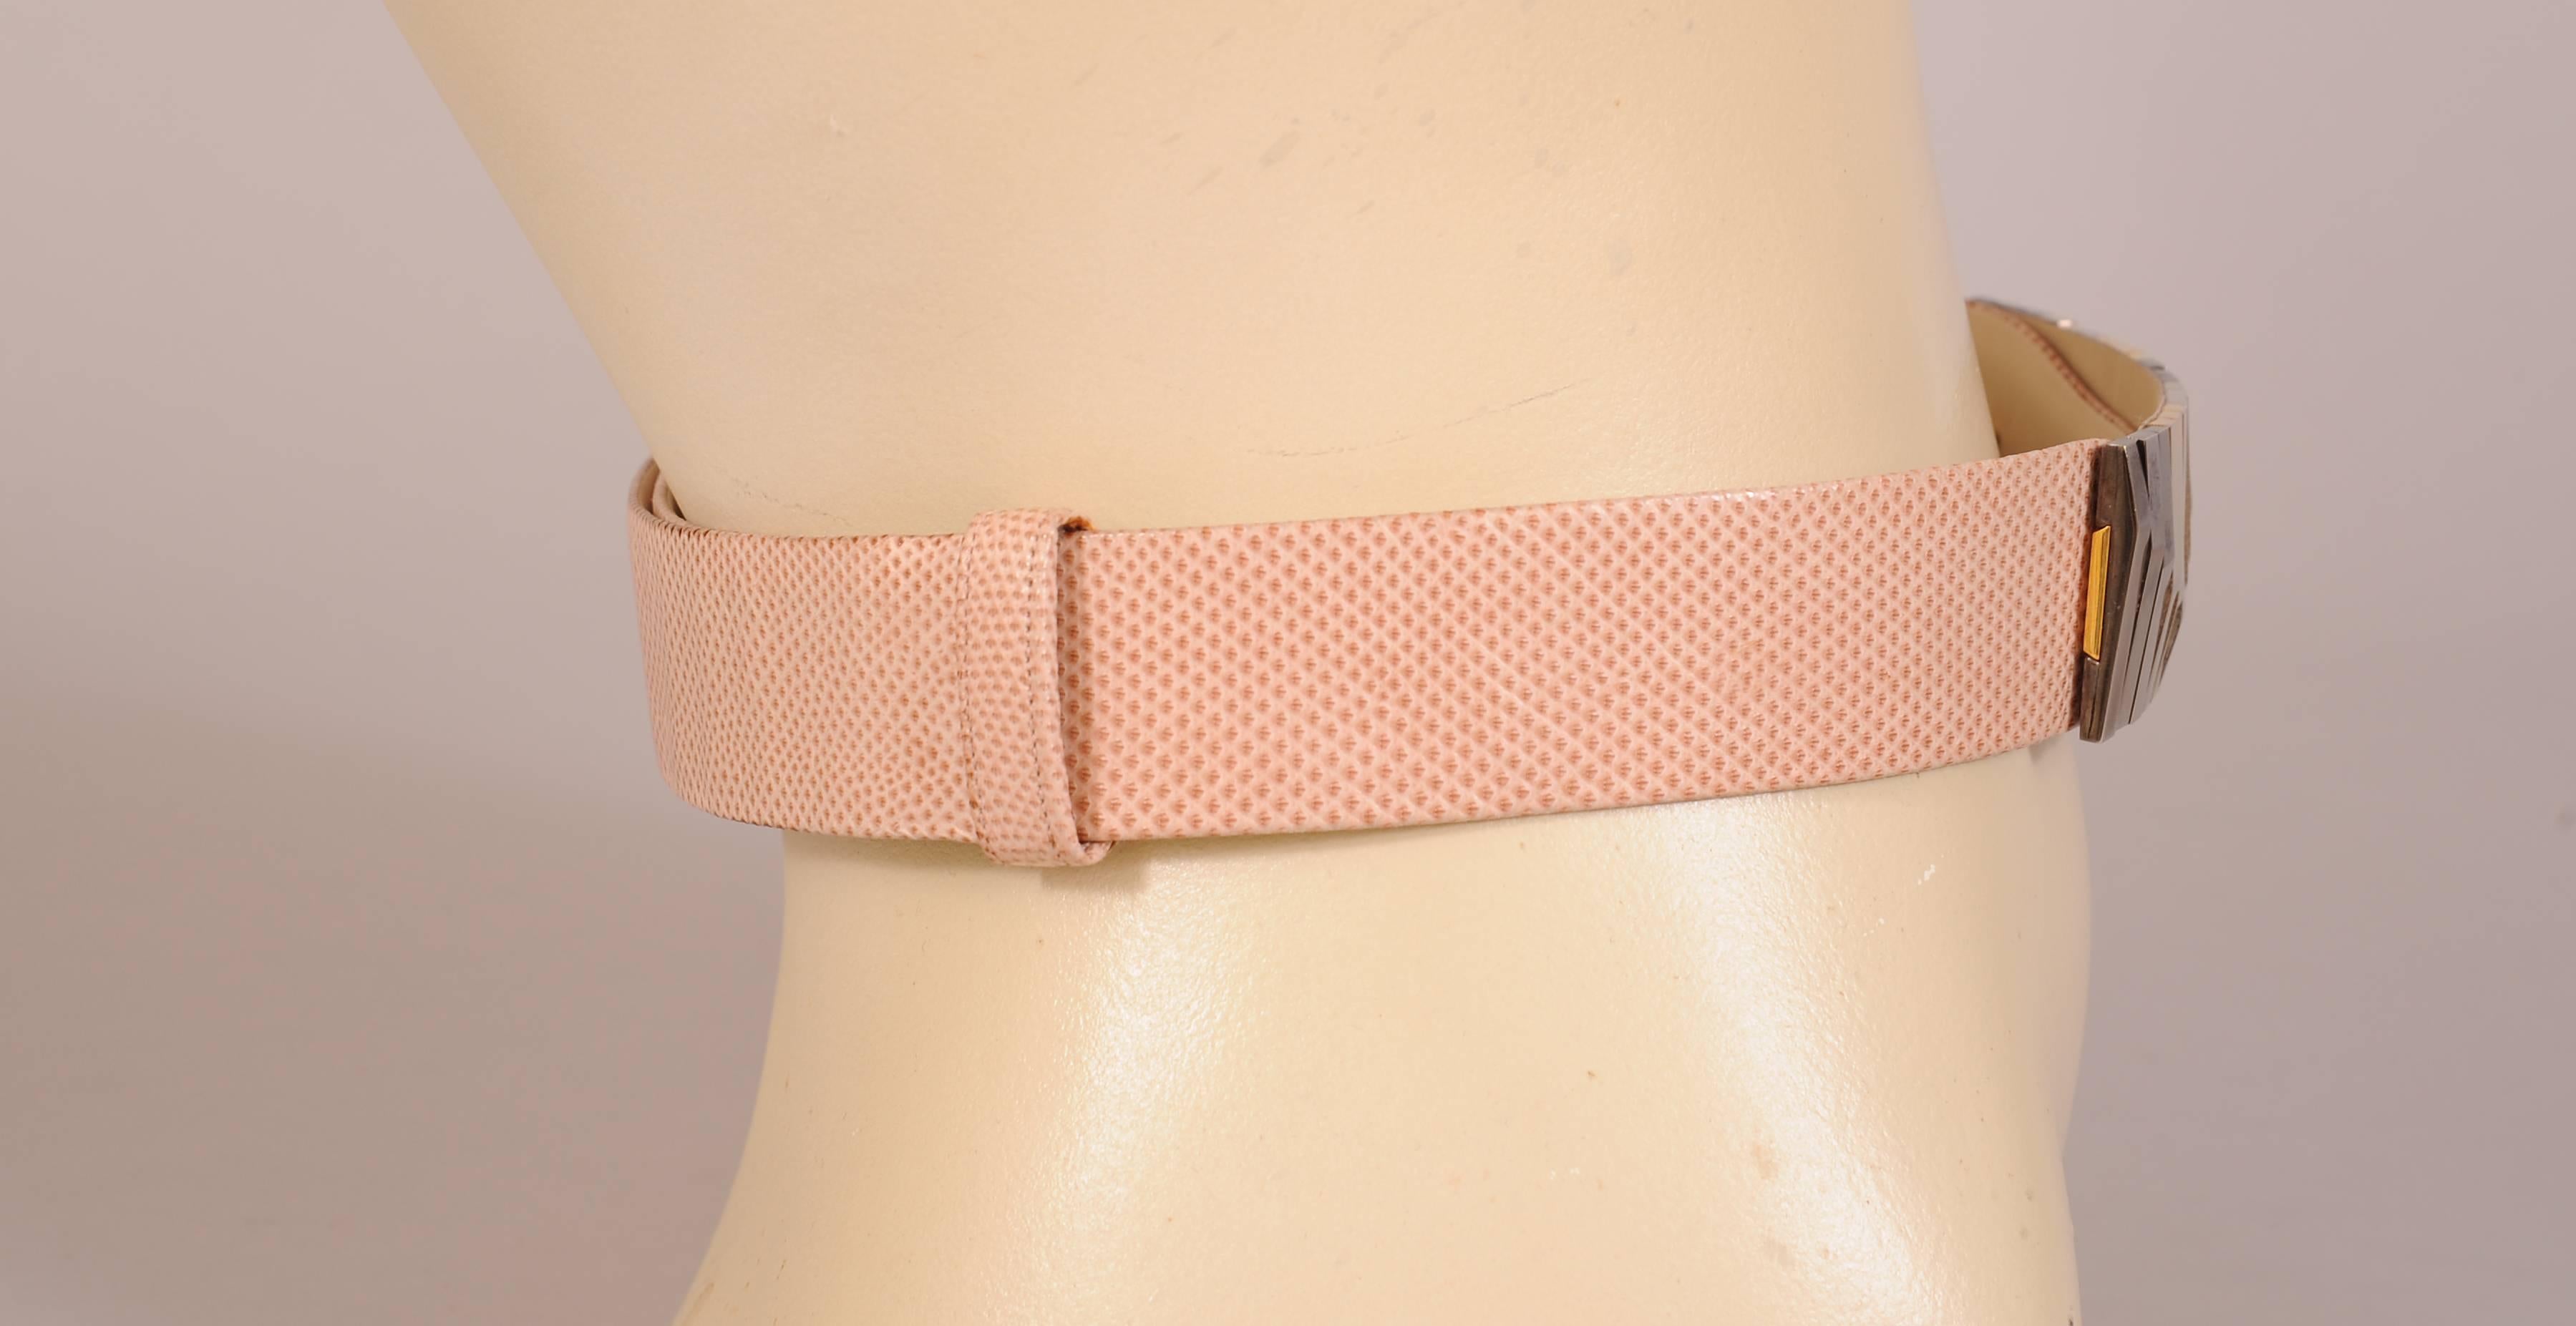 This belt is so chic with a two tone metal buckle on a pink/beige karung skin belt. The belt can be adjusted to accommodate a range of sizes from 22" to 37". It is signed Judith Leiber on the interior and it is in excellent